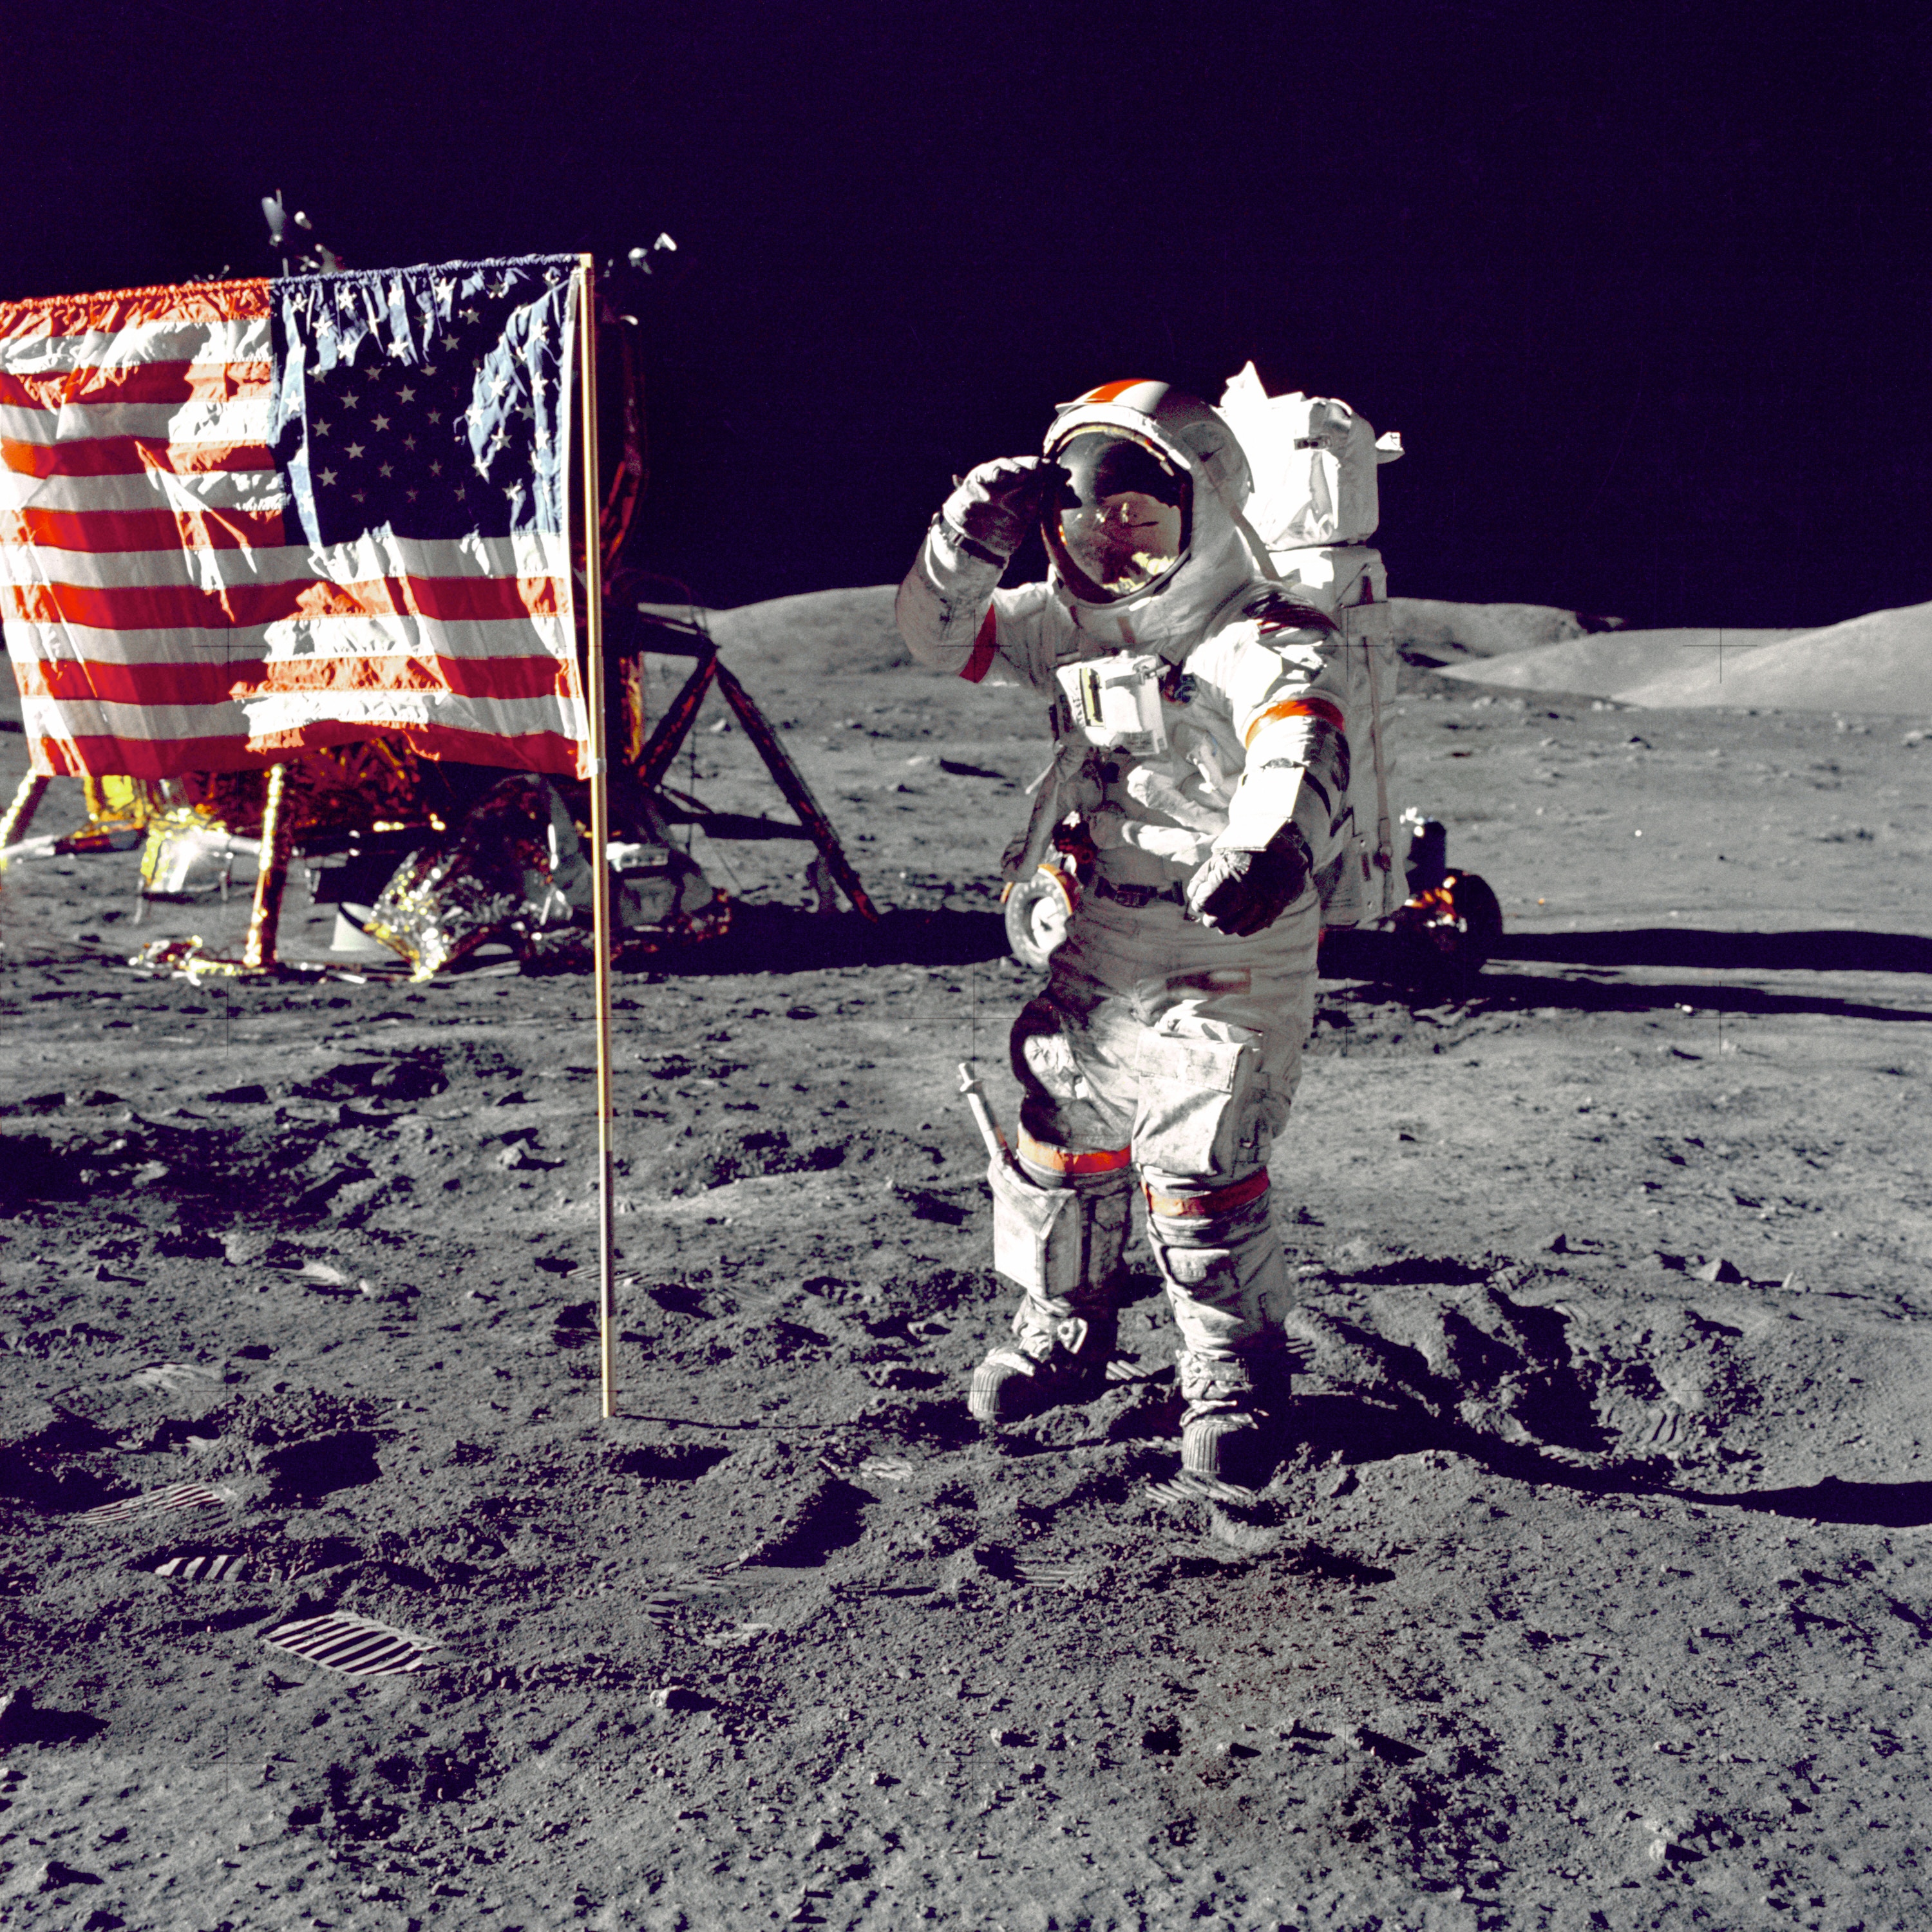 3000x3000 cool wallpaper, american flag, salute, nasa, cool background, walk on the moon, wallpaper, alien, flag, usa, apollo, spacesuit, space, moon, man on the moon, Free image, astronaut